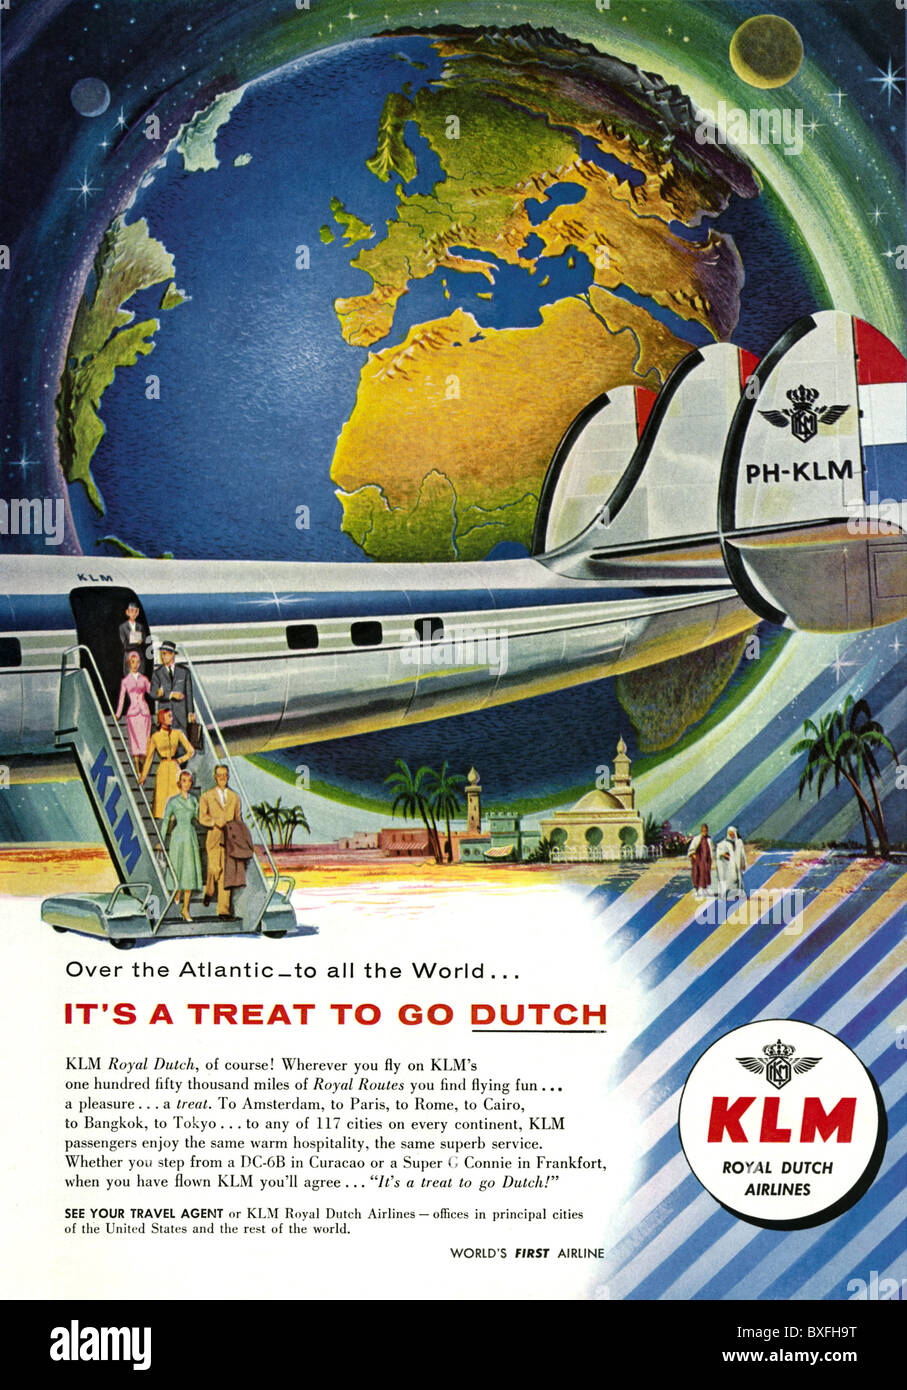 transport / transportation, aviation, Royal Dutch Airlines, advertising, Netherlands, 1956, Additional-Rights-Clearences-Not Available Stock Photo